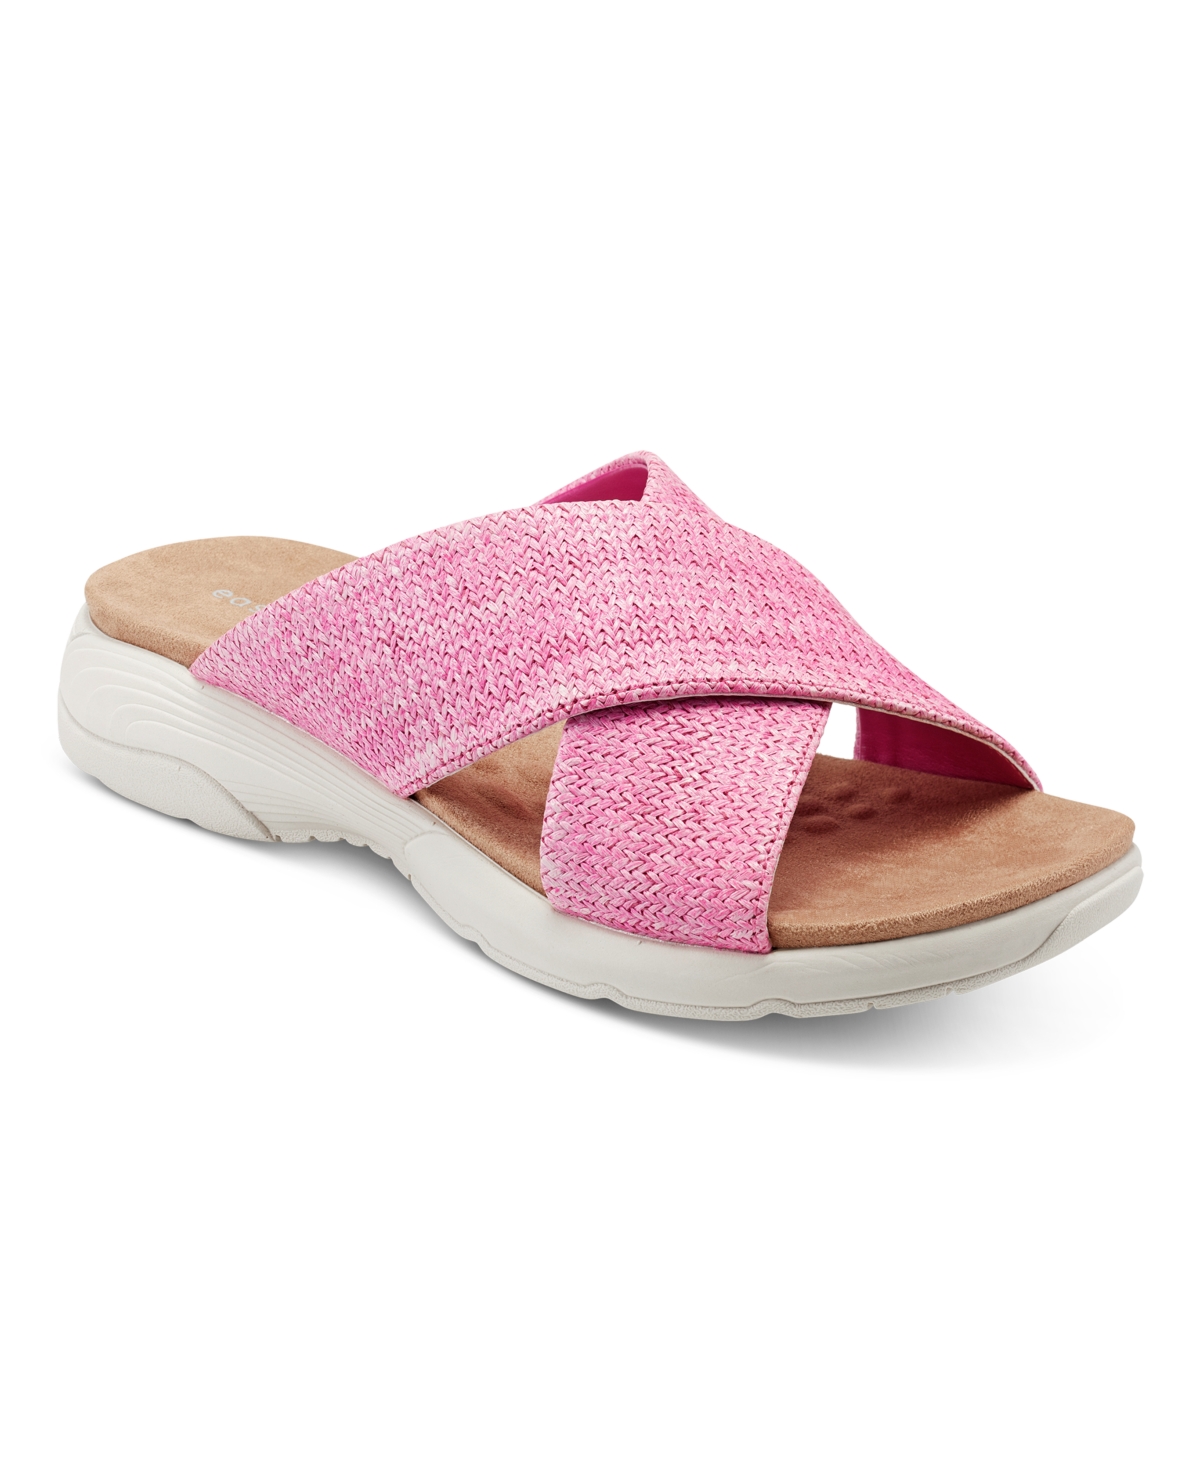 Women's Taite Square Toe Casual Flat Sandals - Pink